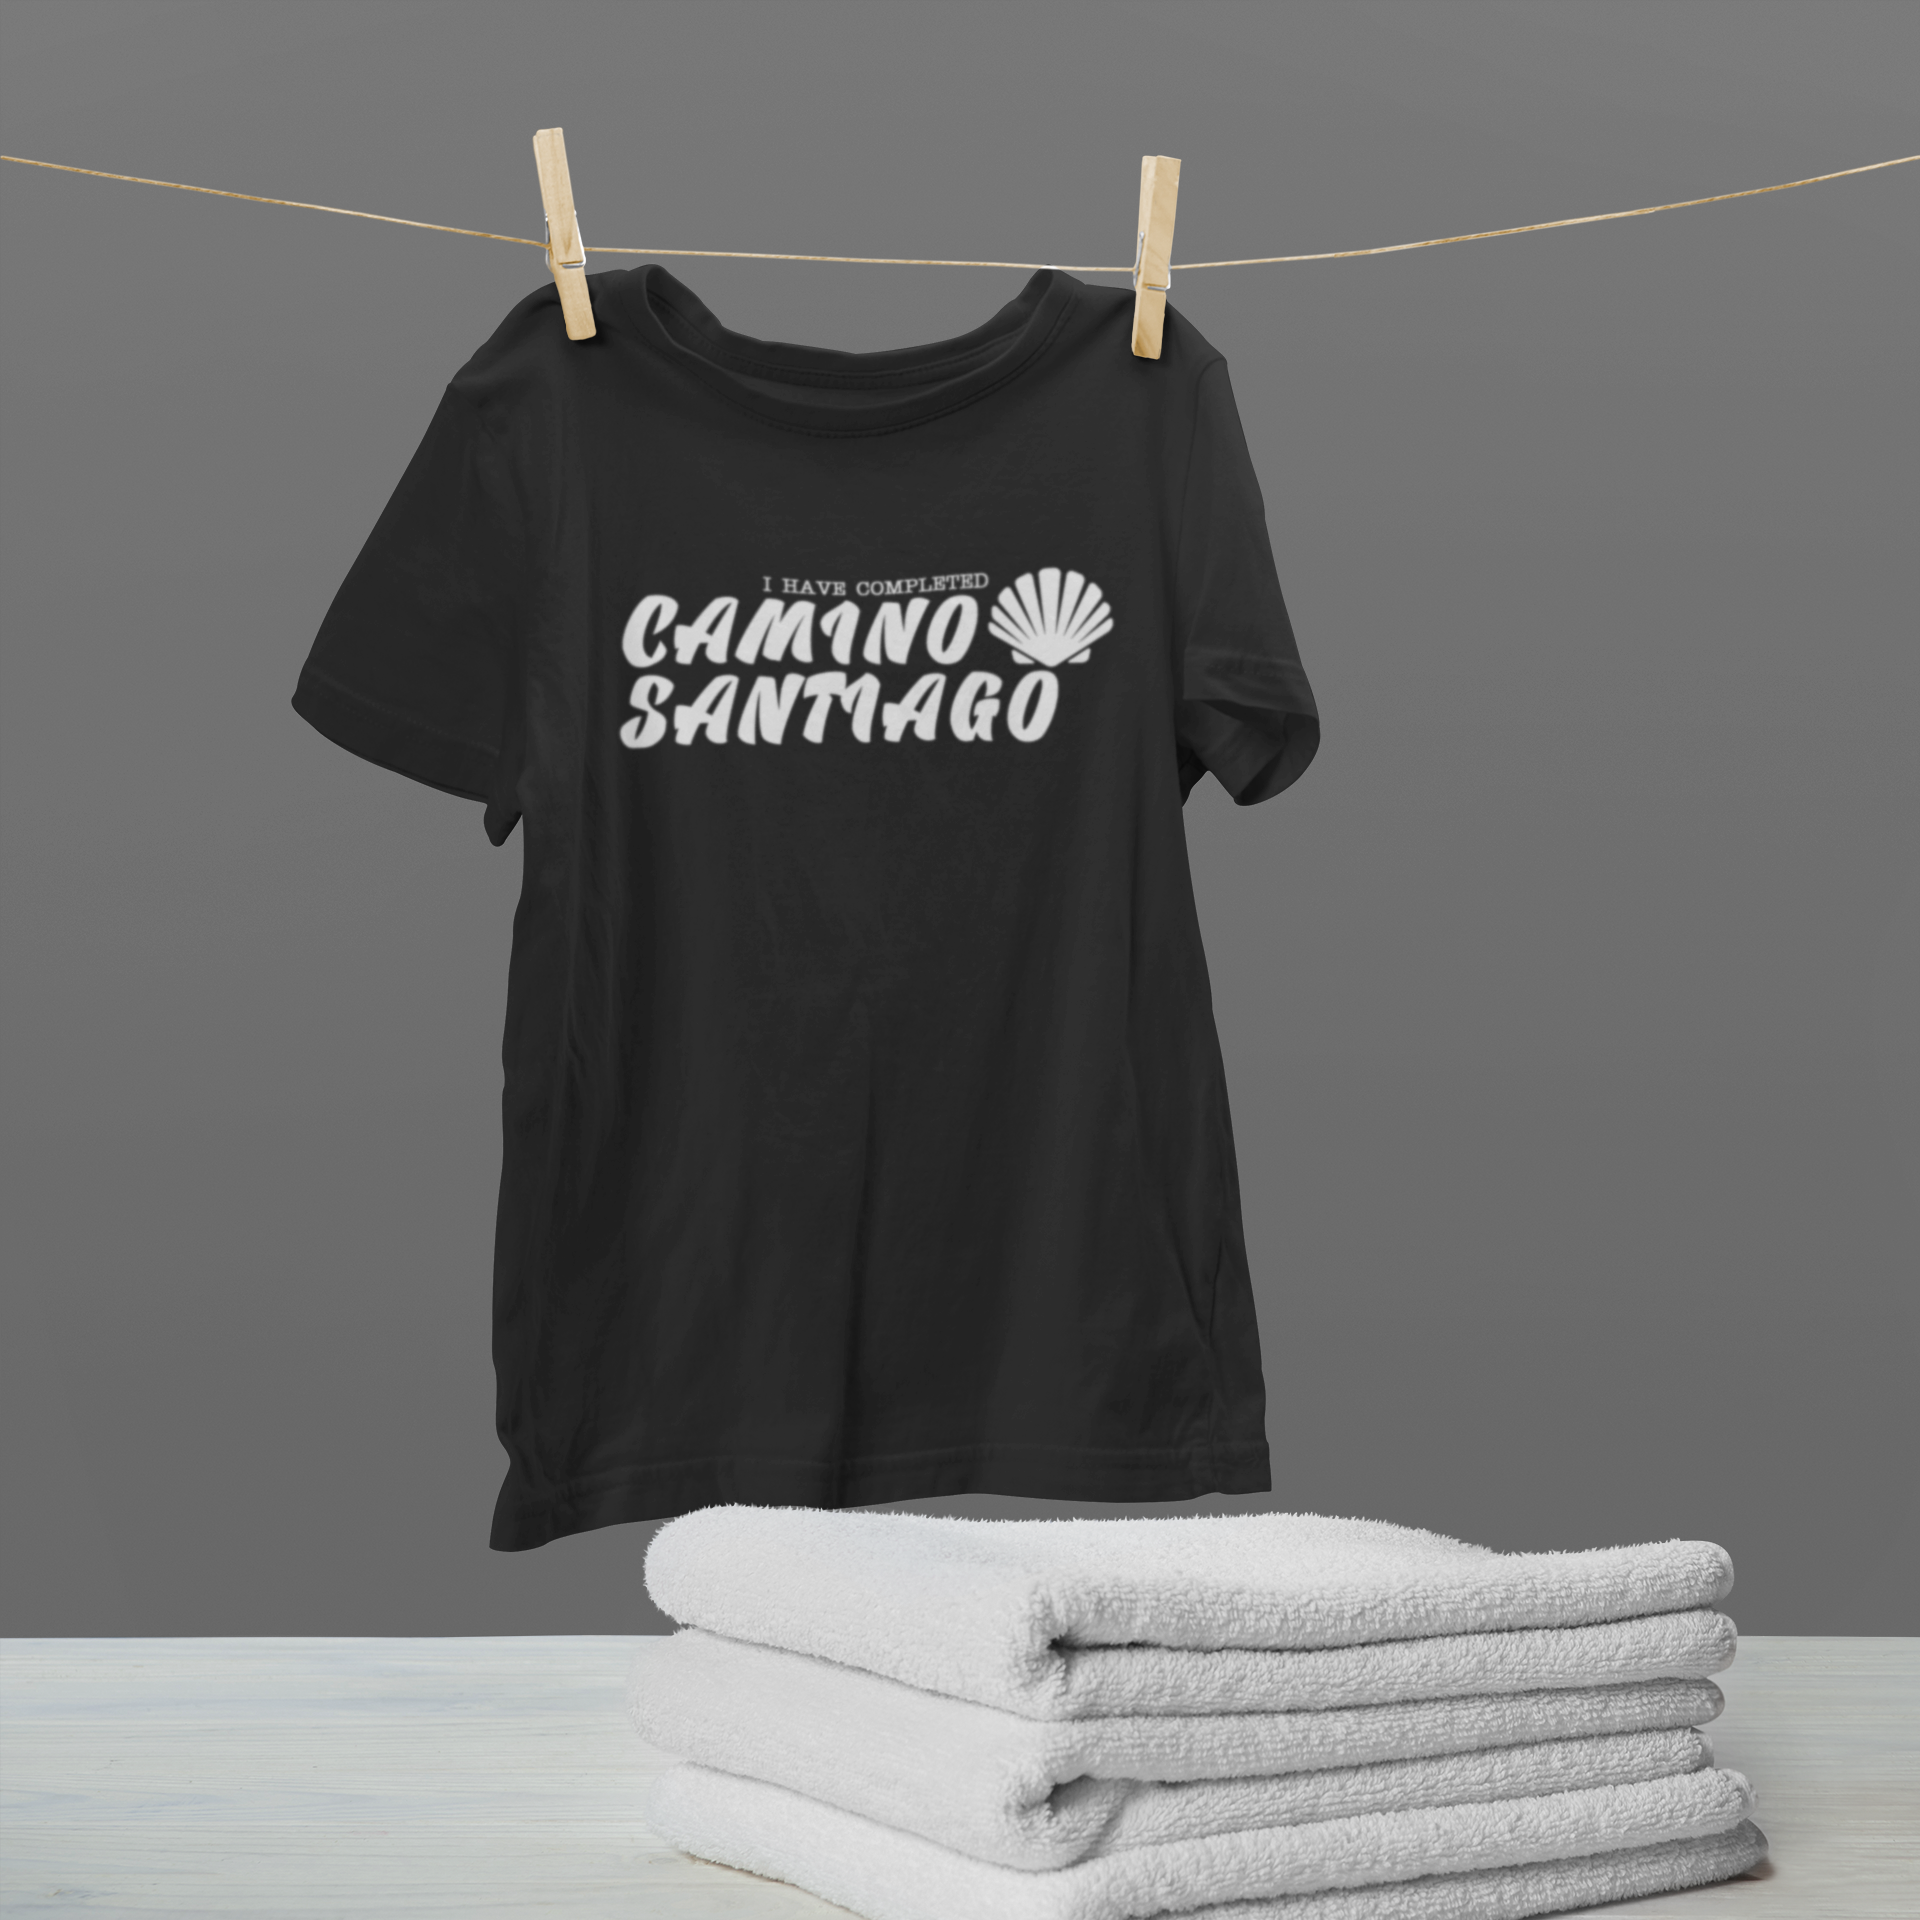 mockup-of-a-hanging-t-shirt-by-some-folded-towels-46150-r-el2